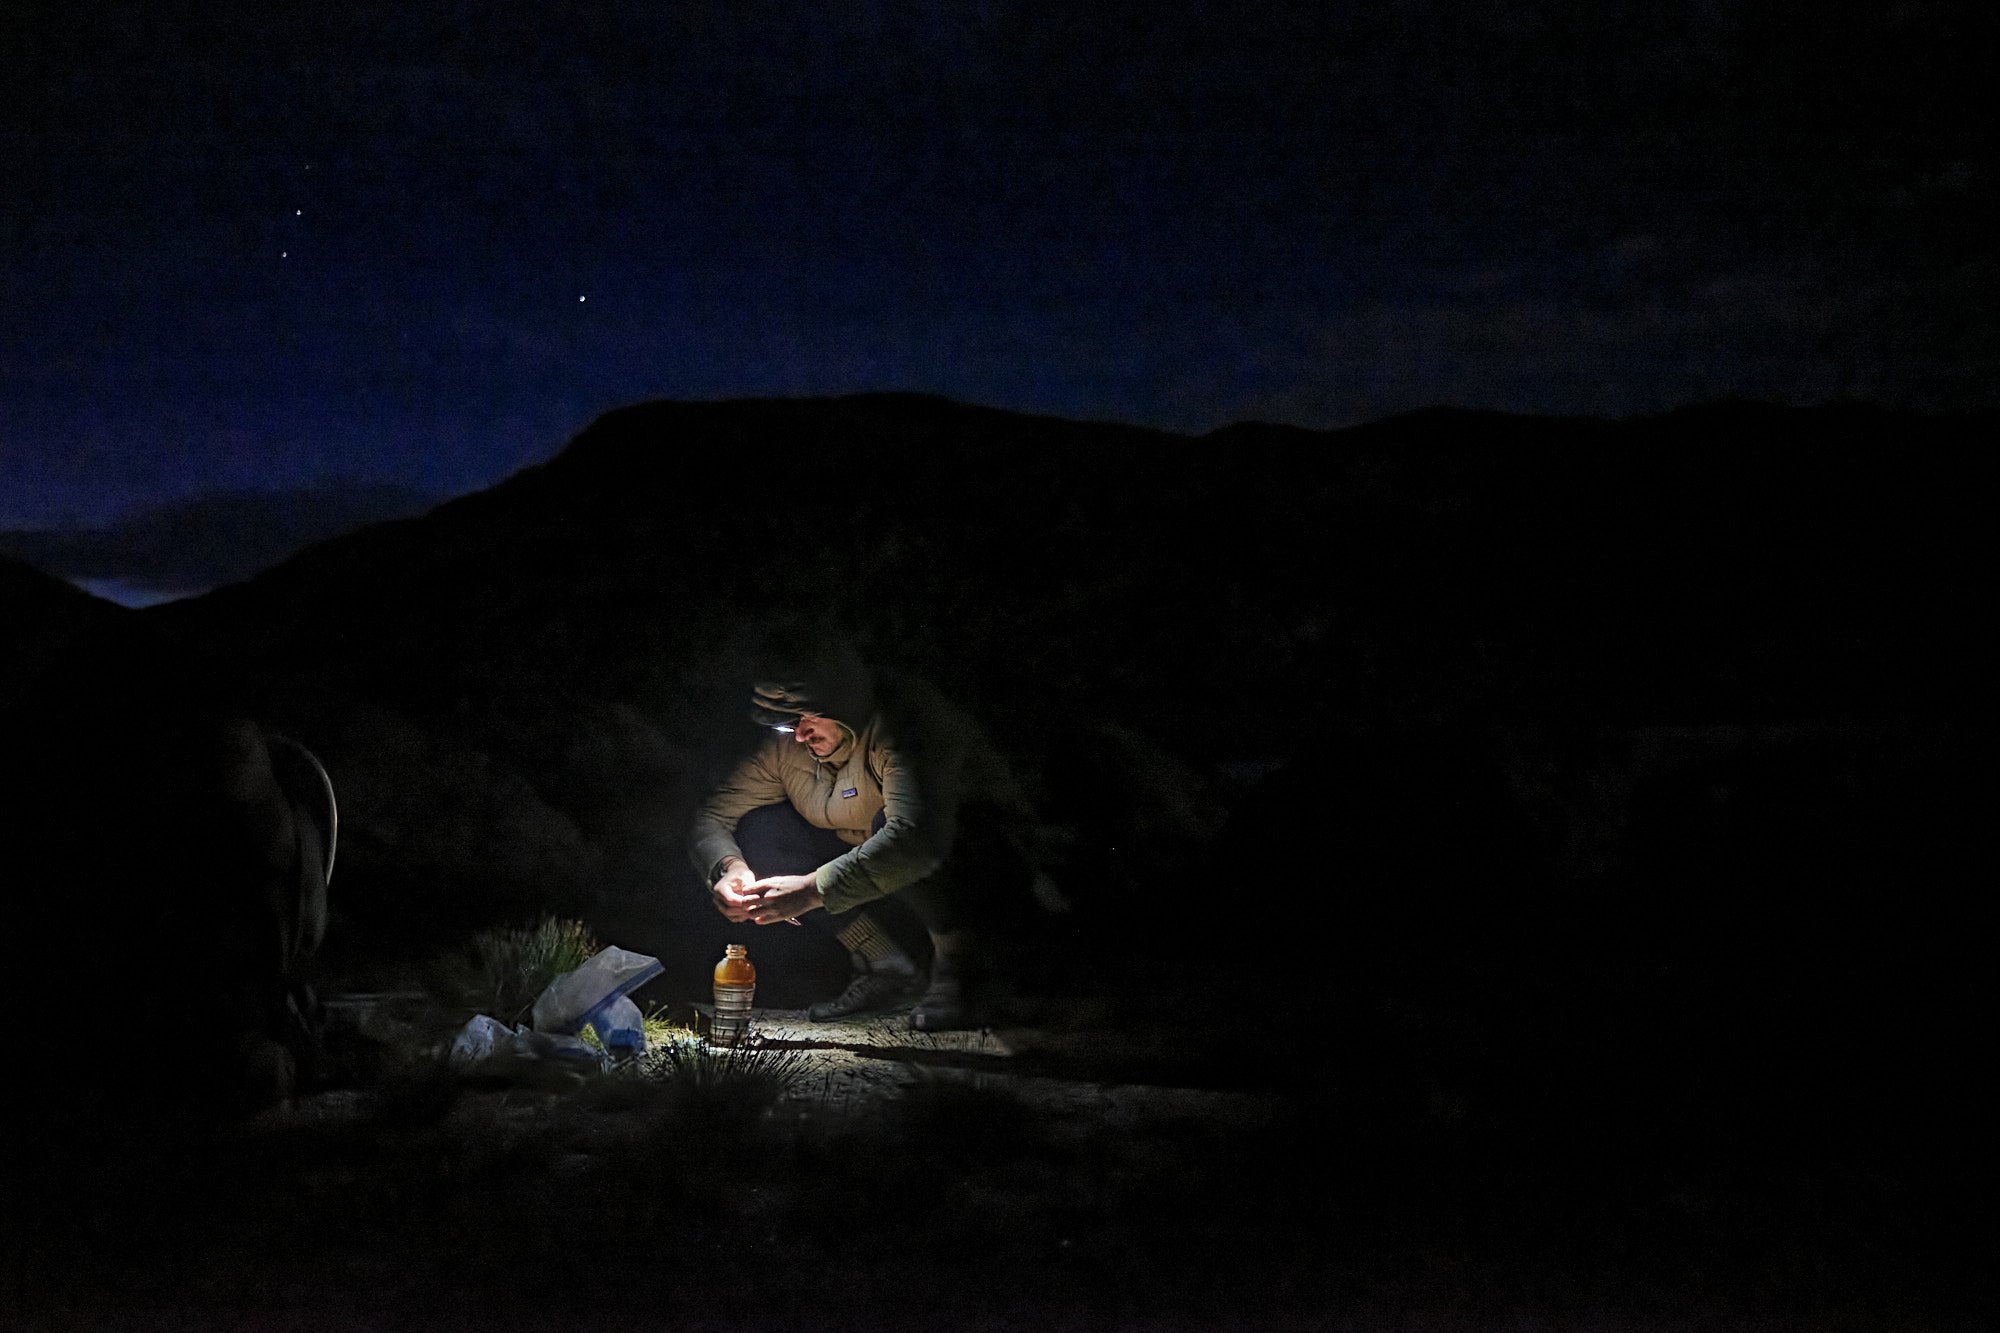  Dale whips up some cold coffee during an alpine start. We had to get most of our distance done before 12:00 since the afternoon thunderstorms were sketchy at best, and just made for a miserable time. | Wind River High Route, WY 8/13/22 Day 53 